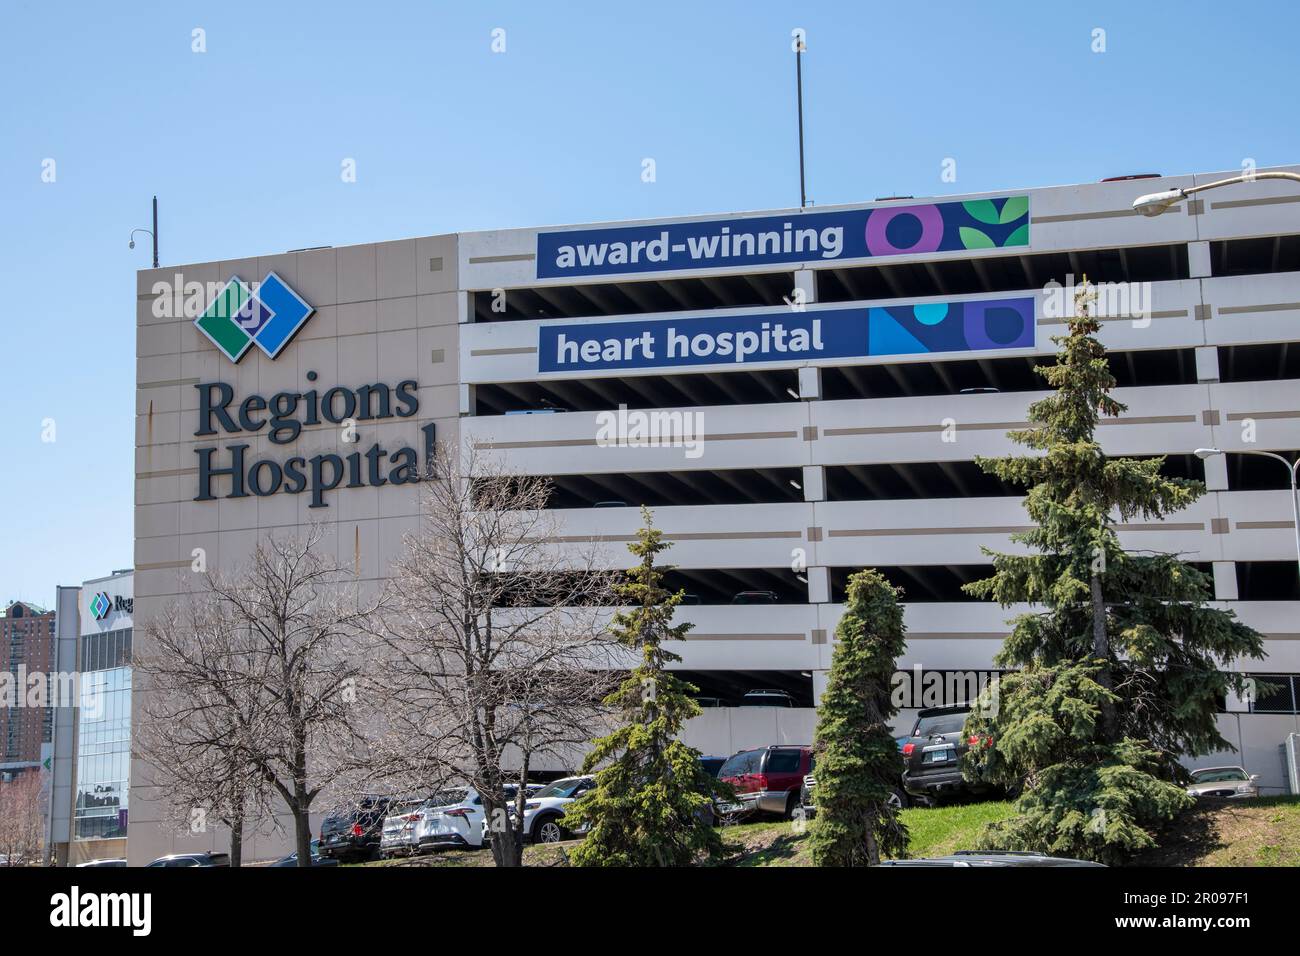 St. Paul, Minnesota. On top of many awards Regions hospital is named a 2022-23 Best Regional Hospital by U.S. News & World Report and an award winning Stock Photo